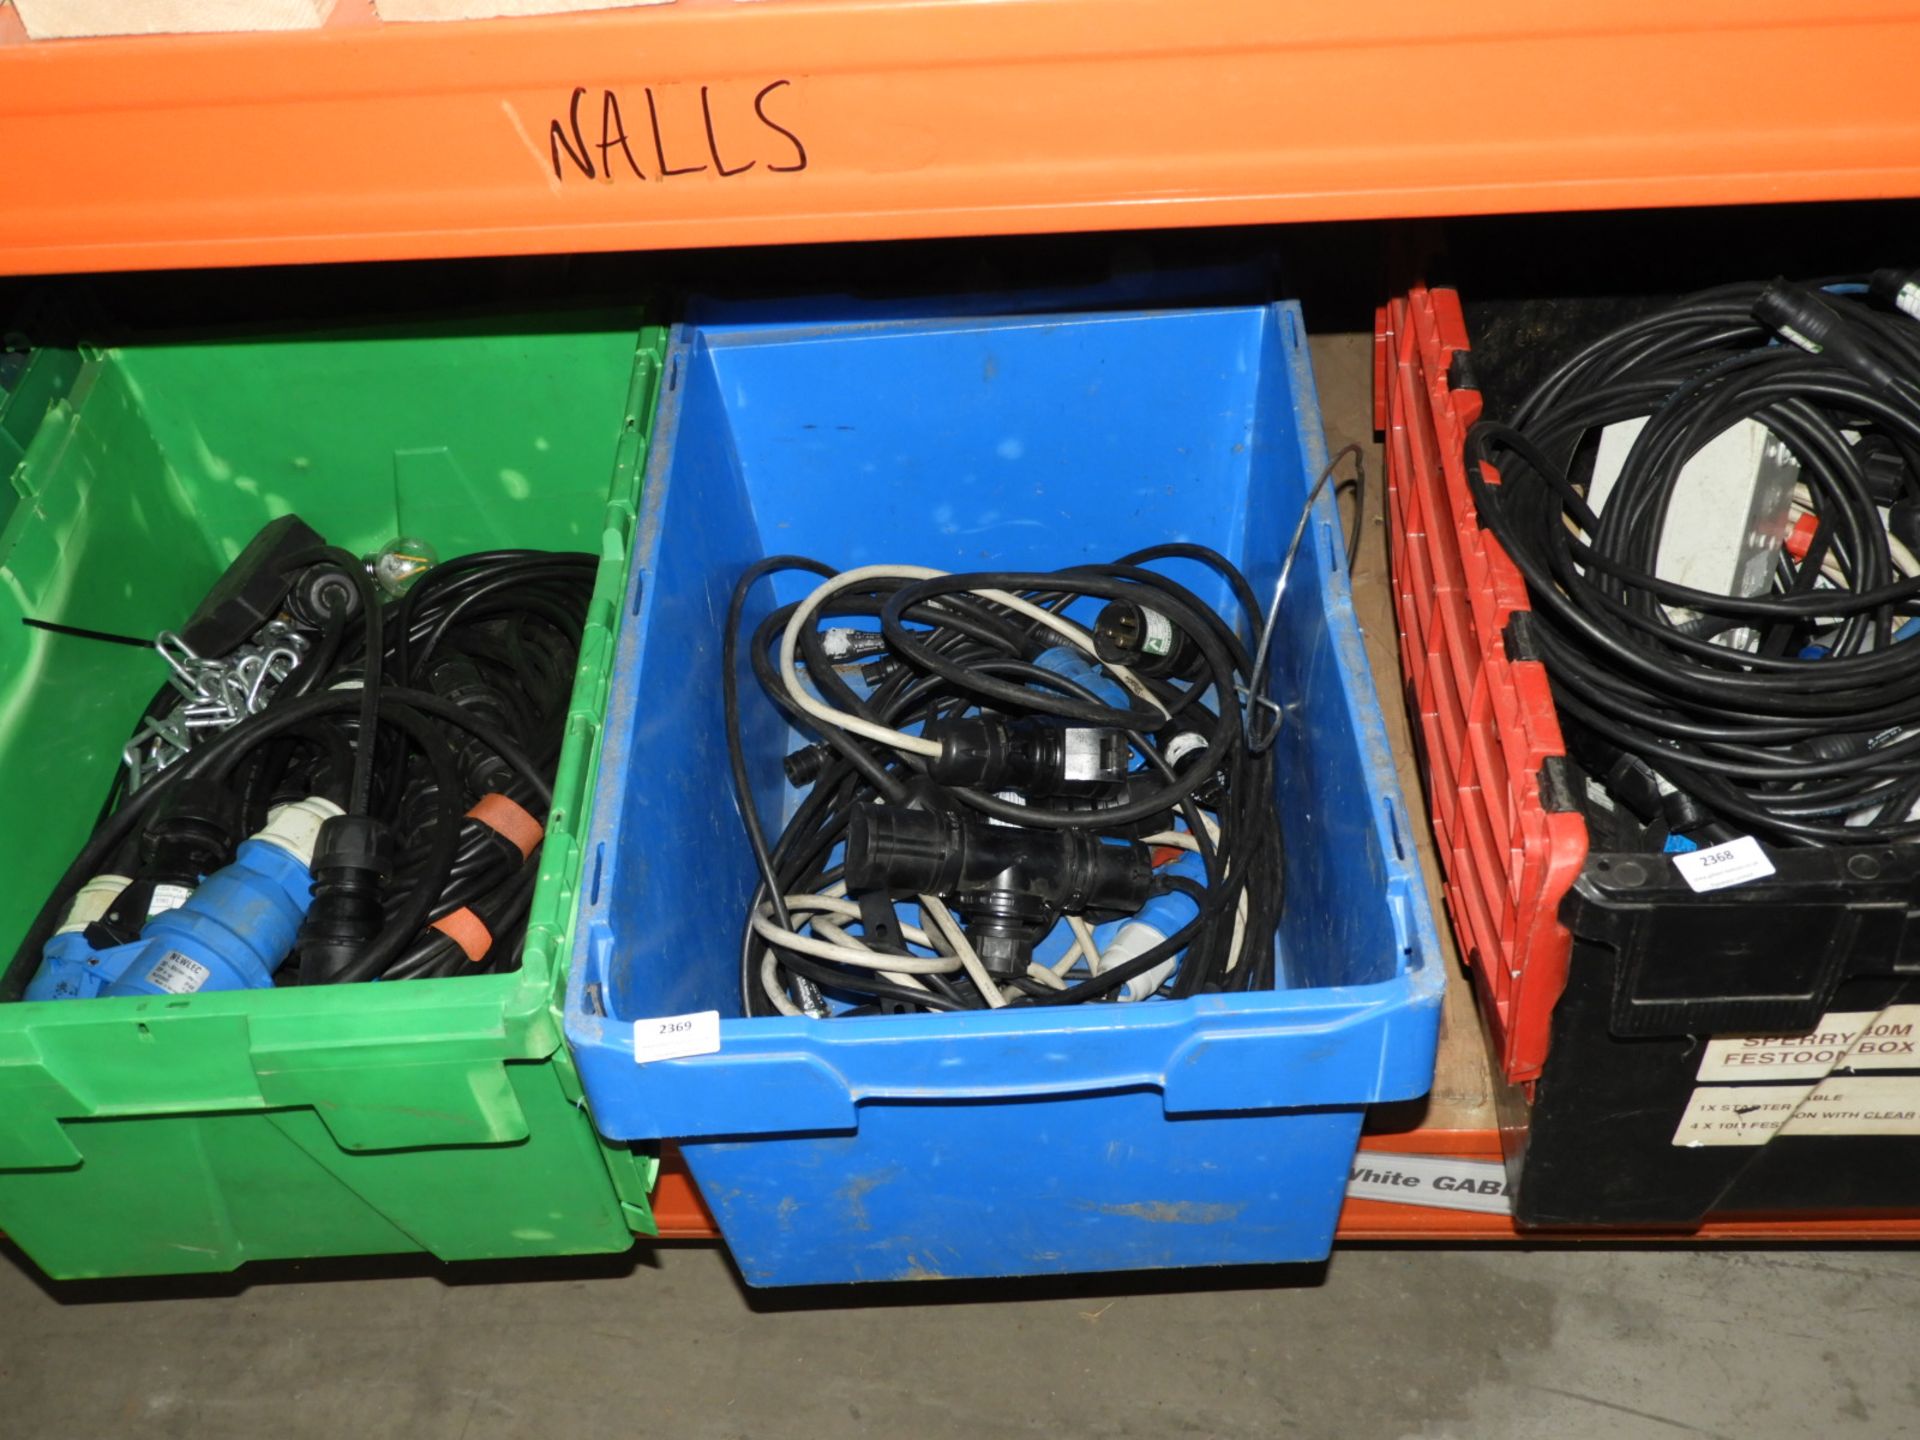 *Box Containing 16A and Other Power Cables and Splitter Boxes